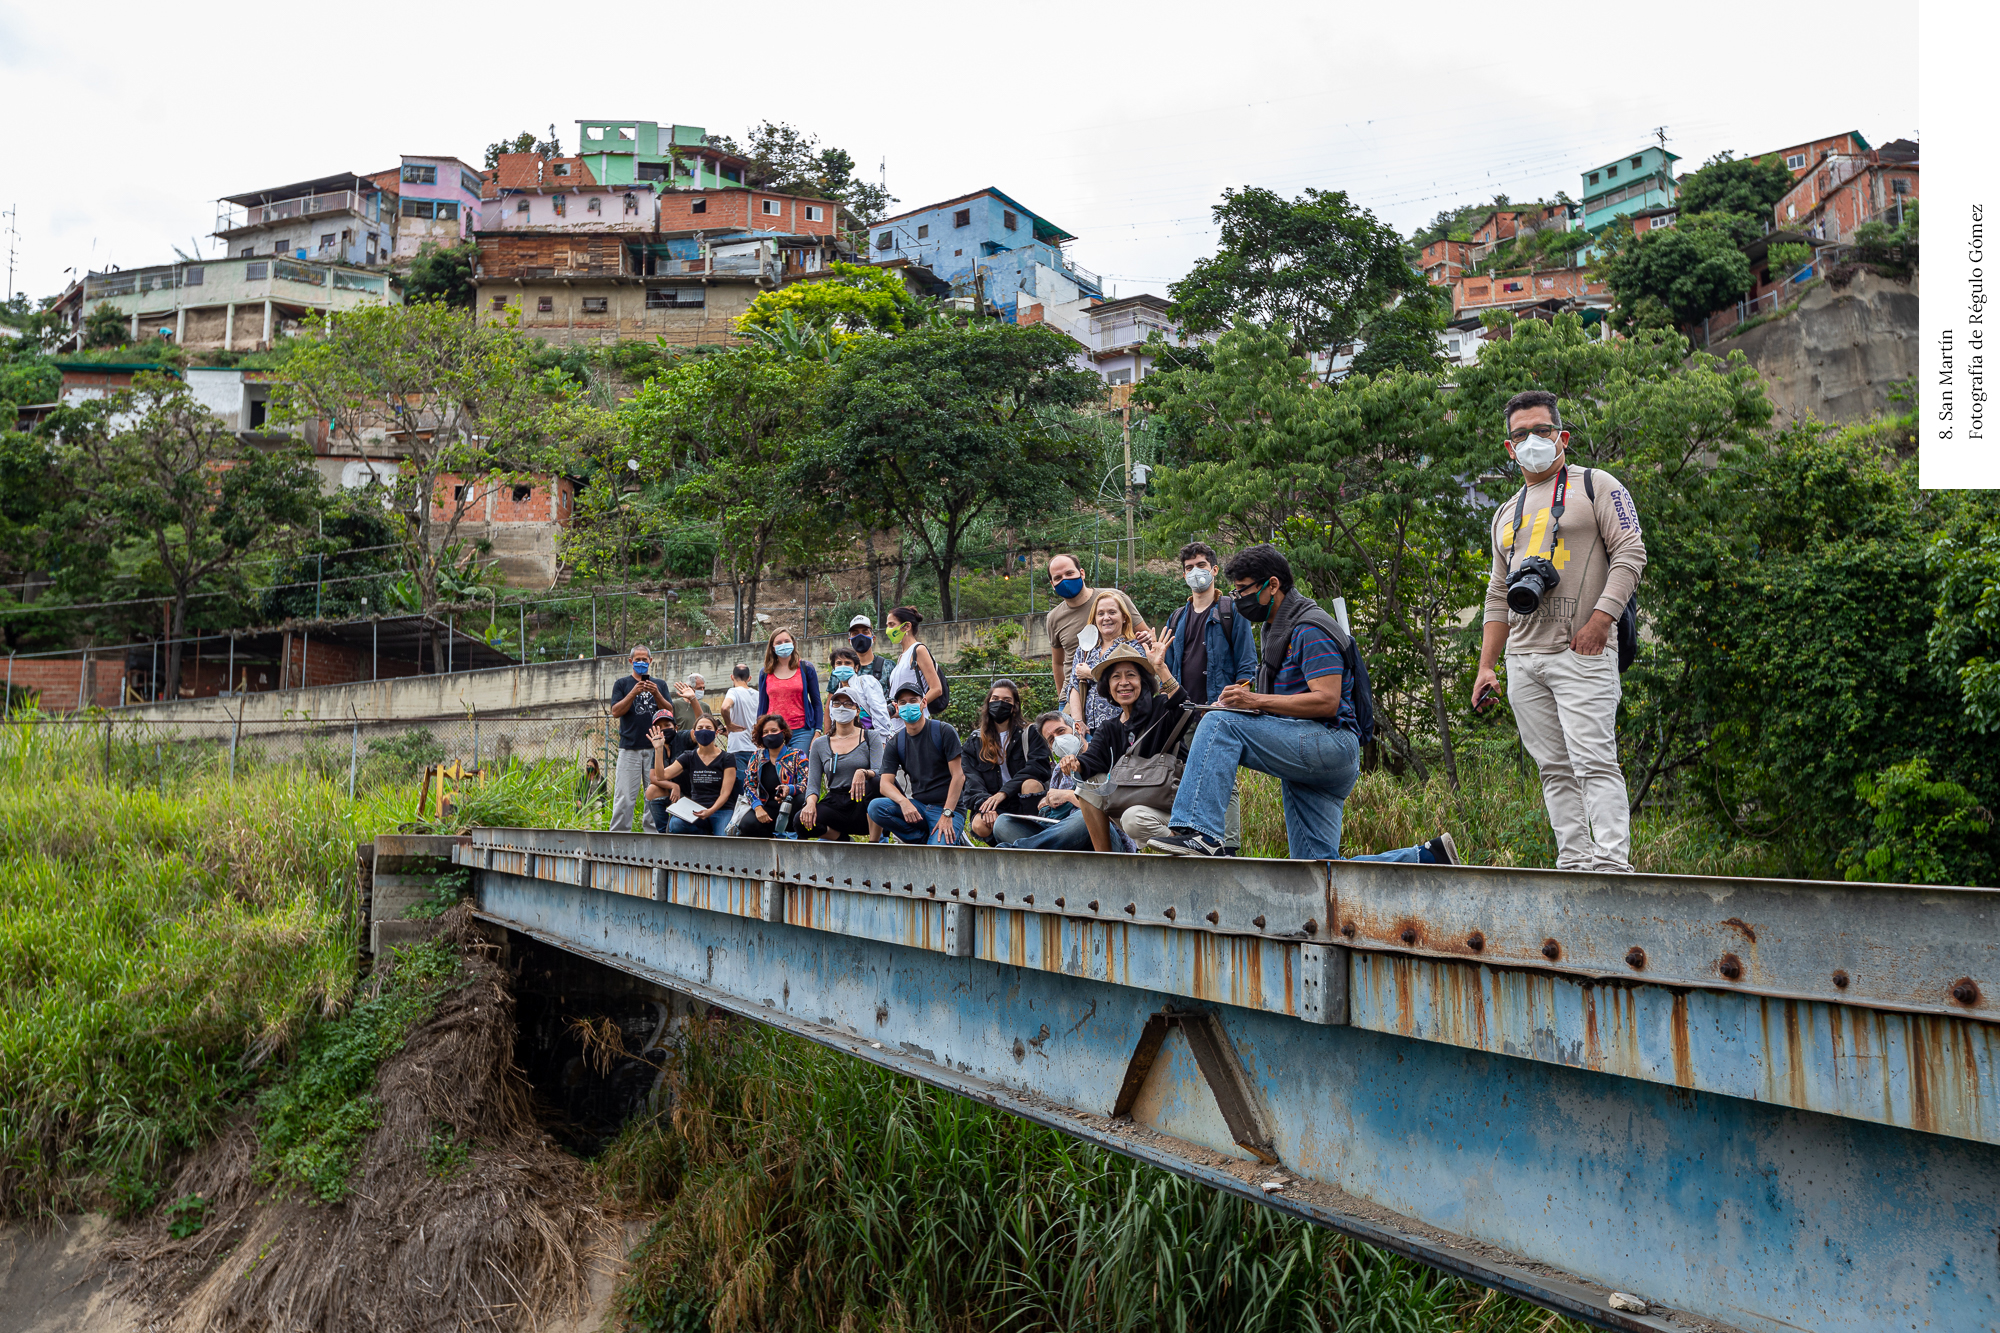 Guaire River: public space and ecology in Caracas